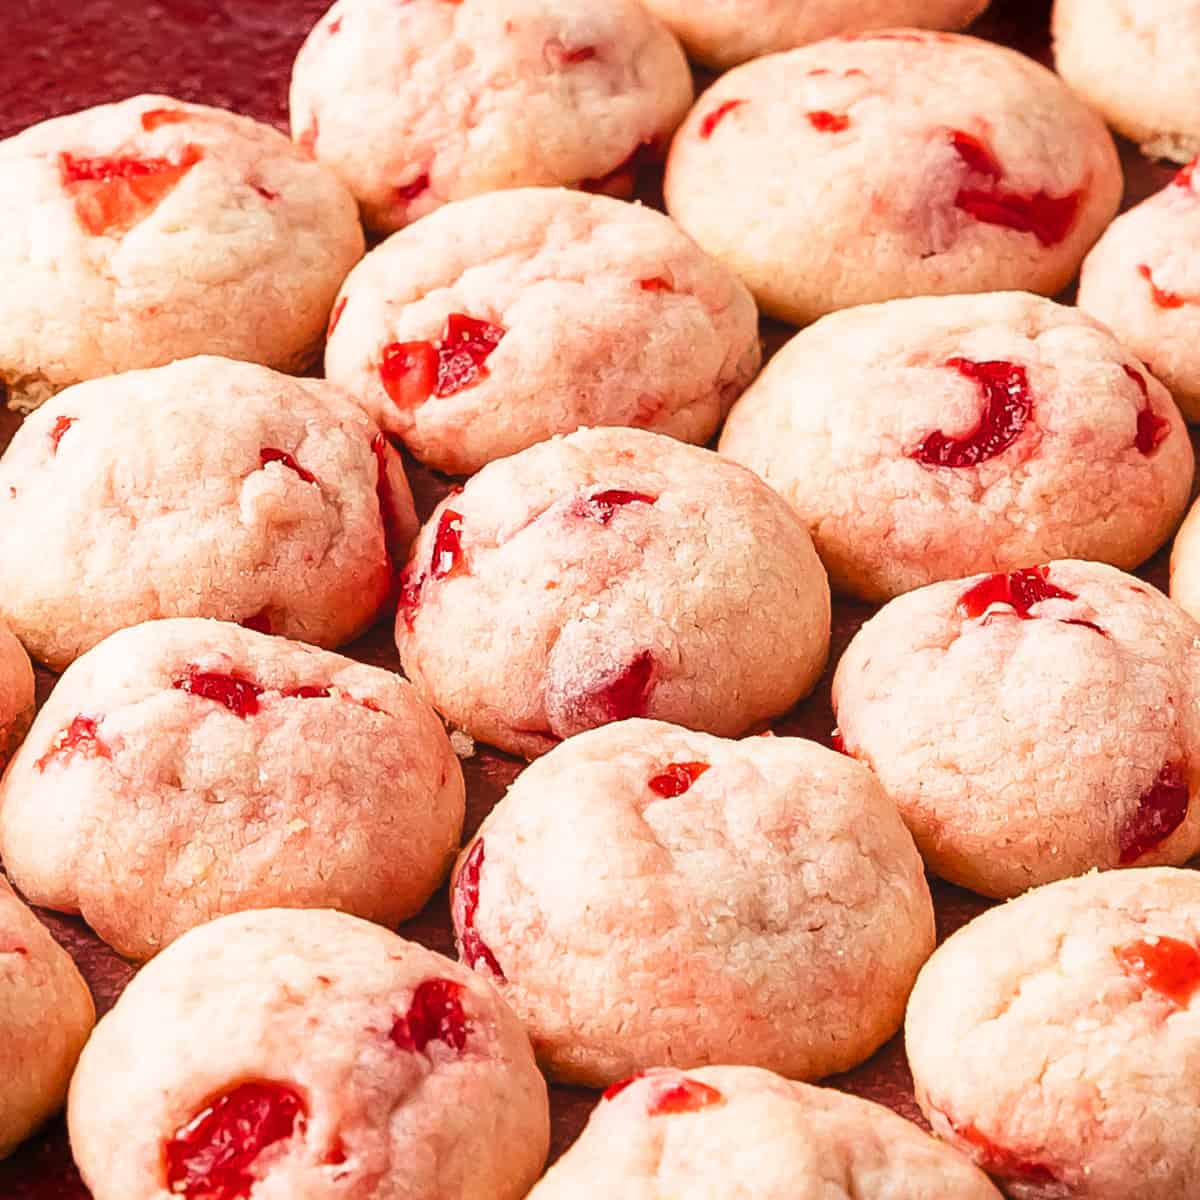 Cherry cookies are soft and buttery shortbread style drop cookies filled with maraschino cherries and sweet almond flavor. These pretty pink maraschino cherry cookies are the perfect quick and easy cherry sugar cookie recipe for any occasion.